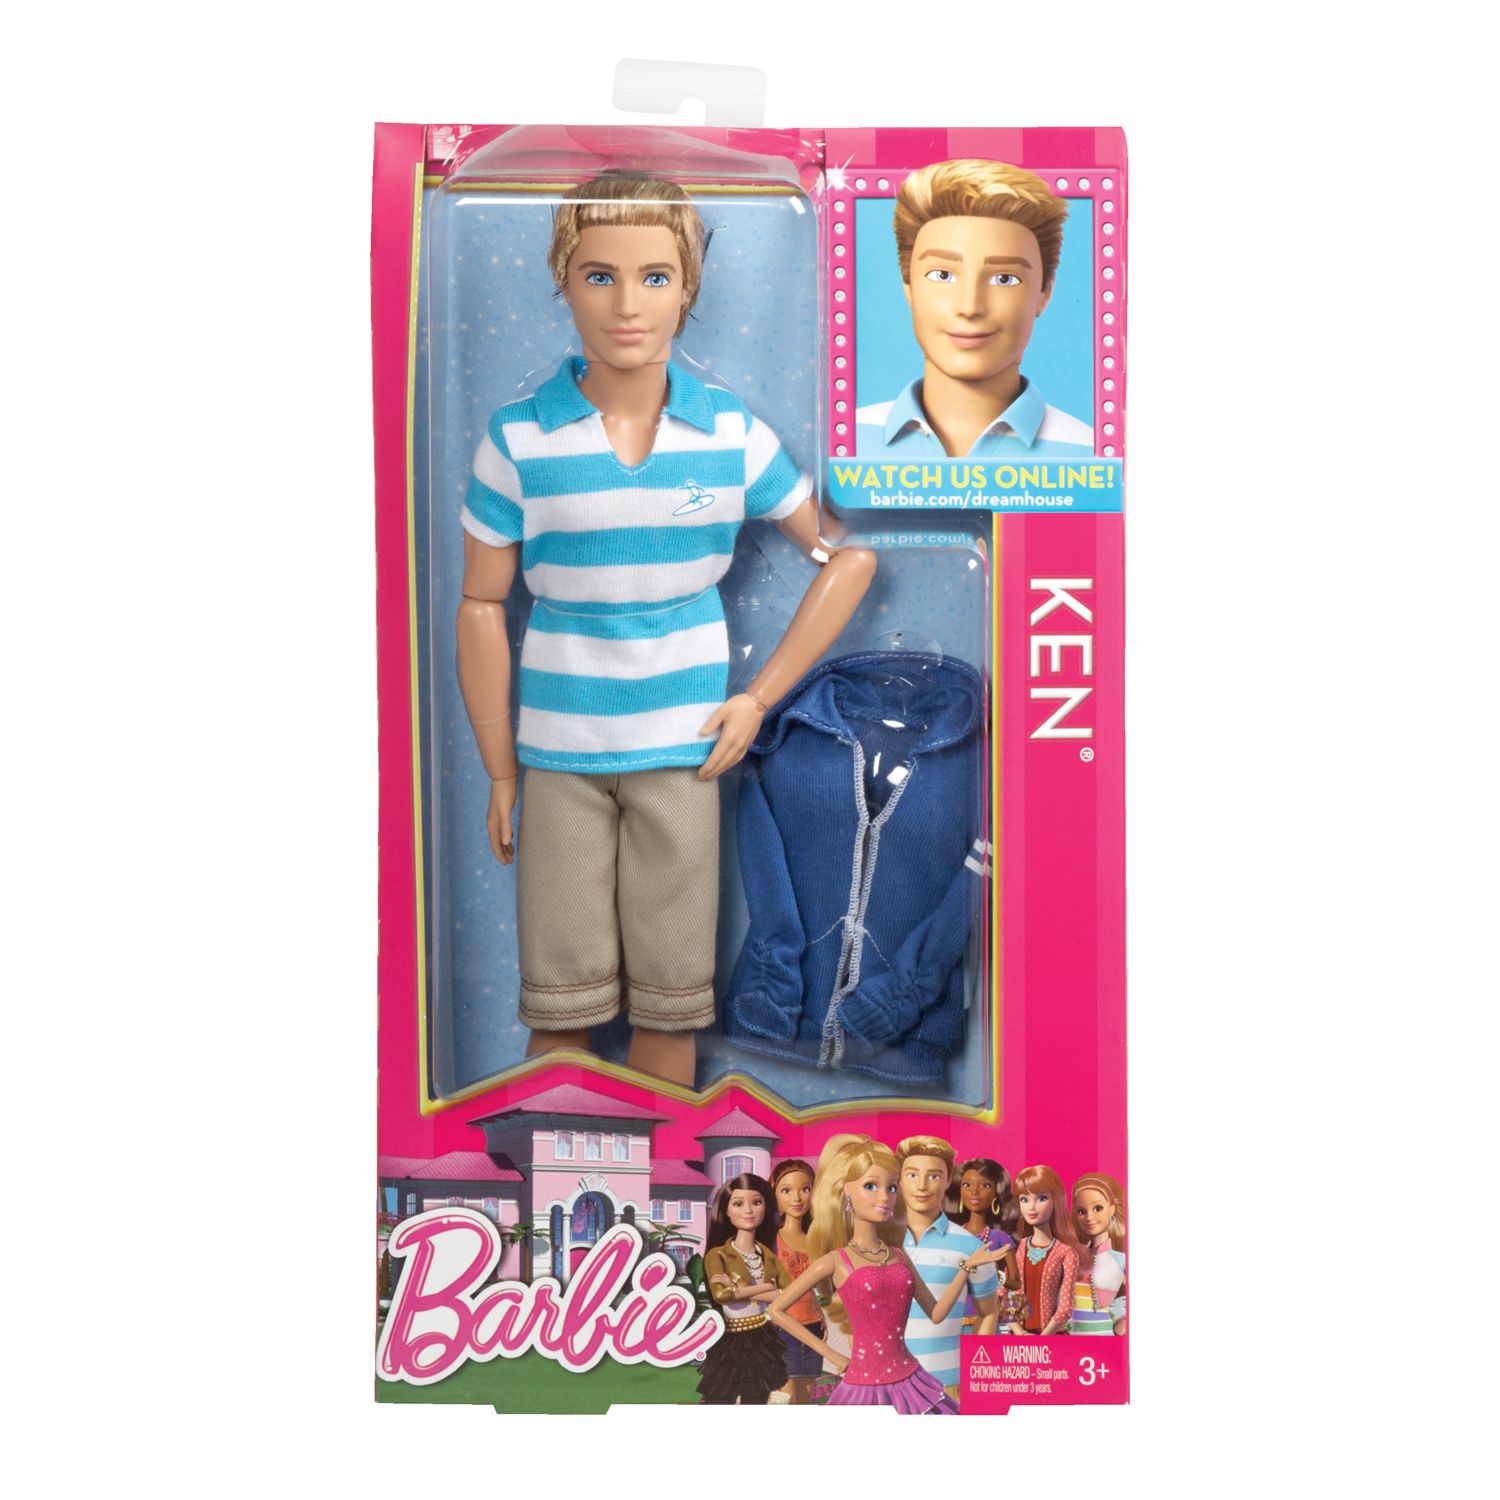 ken life in the dreamhouse